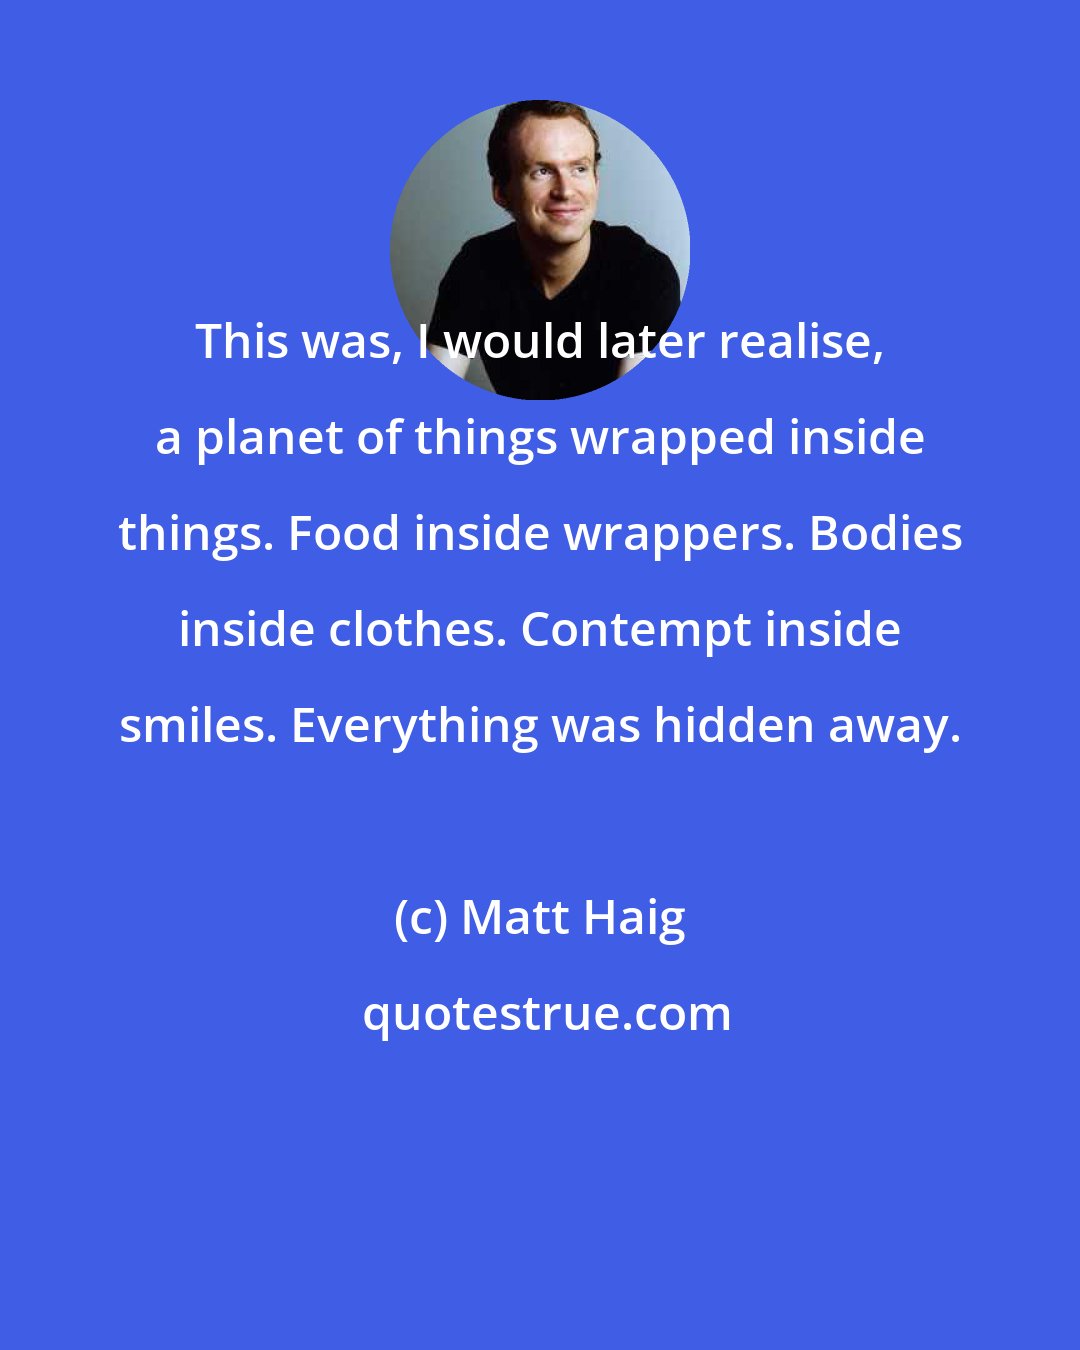 Matt Haig: This was, I would later realise, a planet of things wrapped inside things. Food inside wrappers. Bodies inside clothes. Contempt inside smiles. Everything was hidden away.